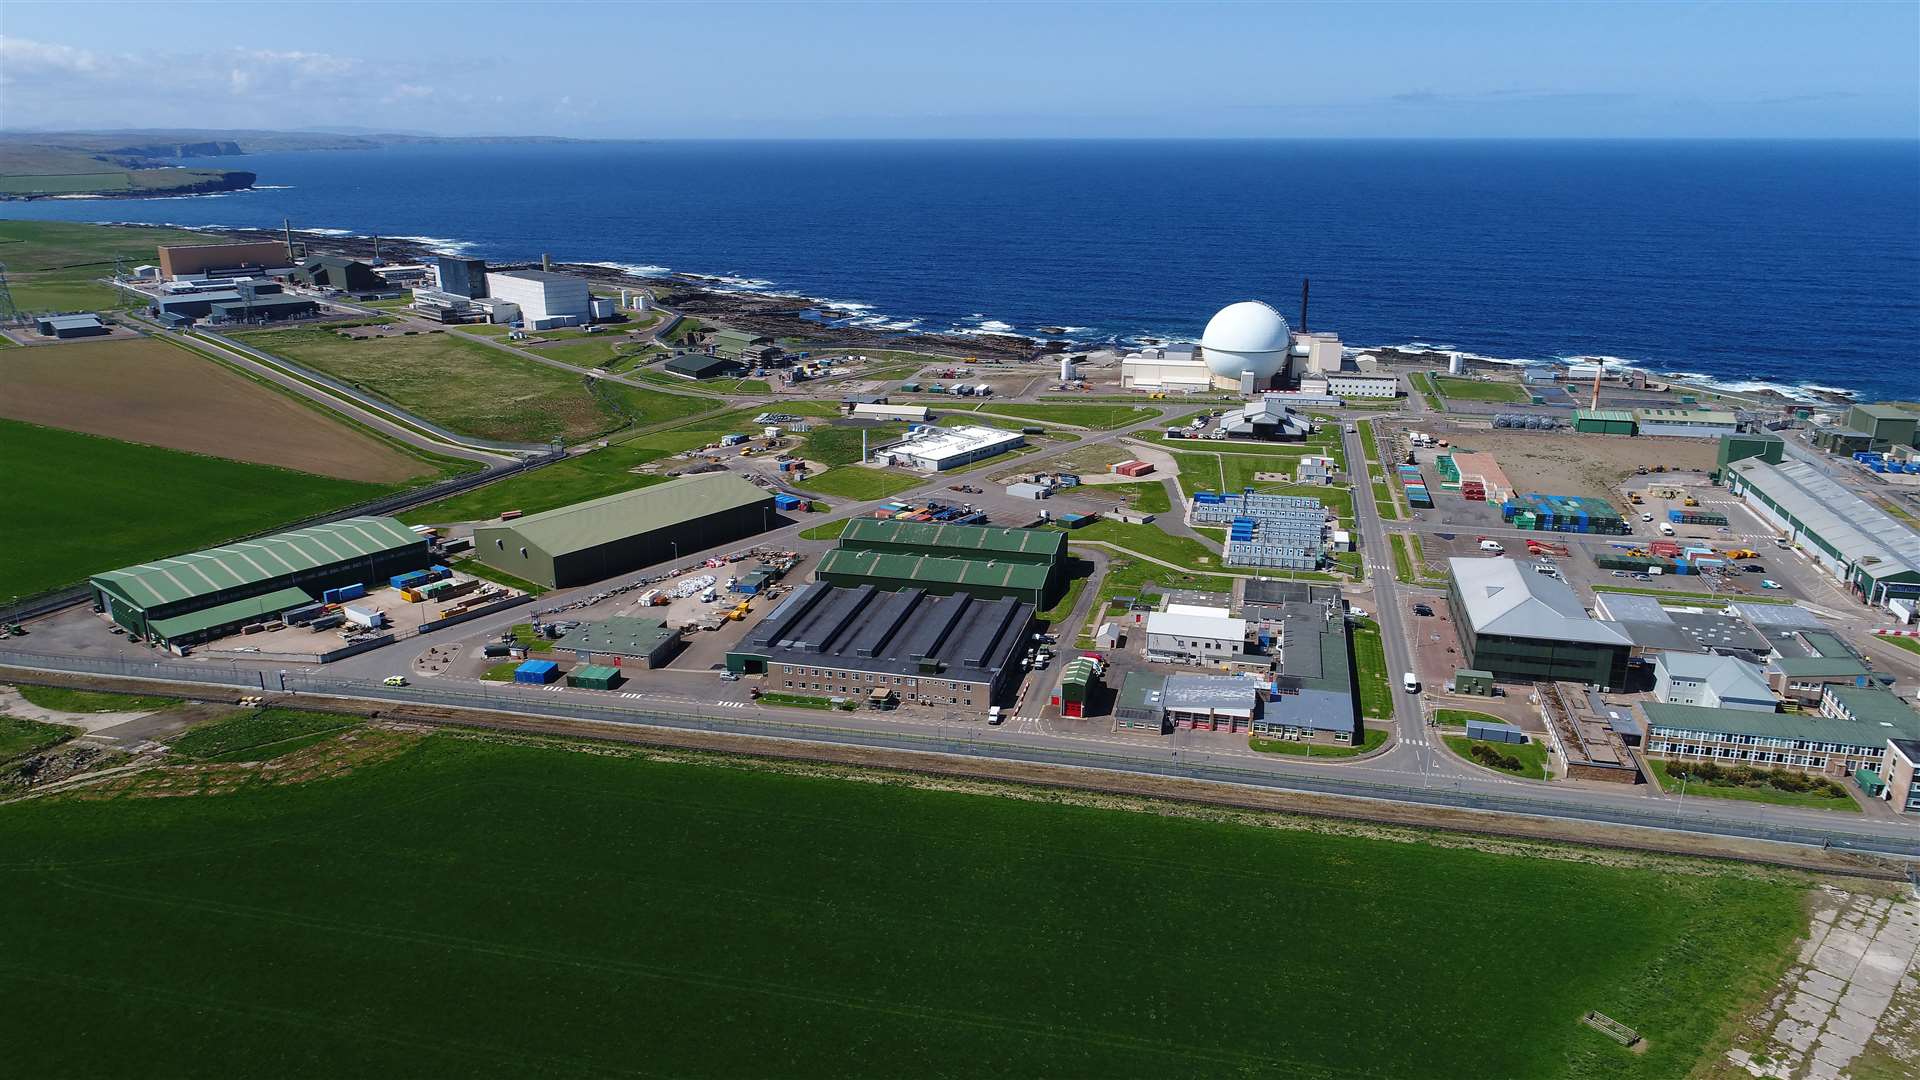 The future use of the Dounreay site could influence plans for the next stages of its decommissioning. Picture: DSRL / NDA